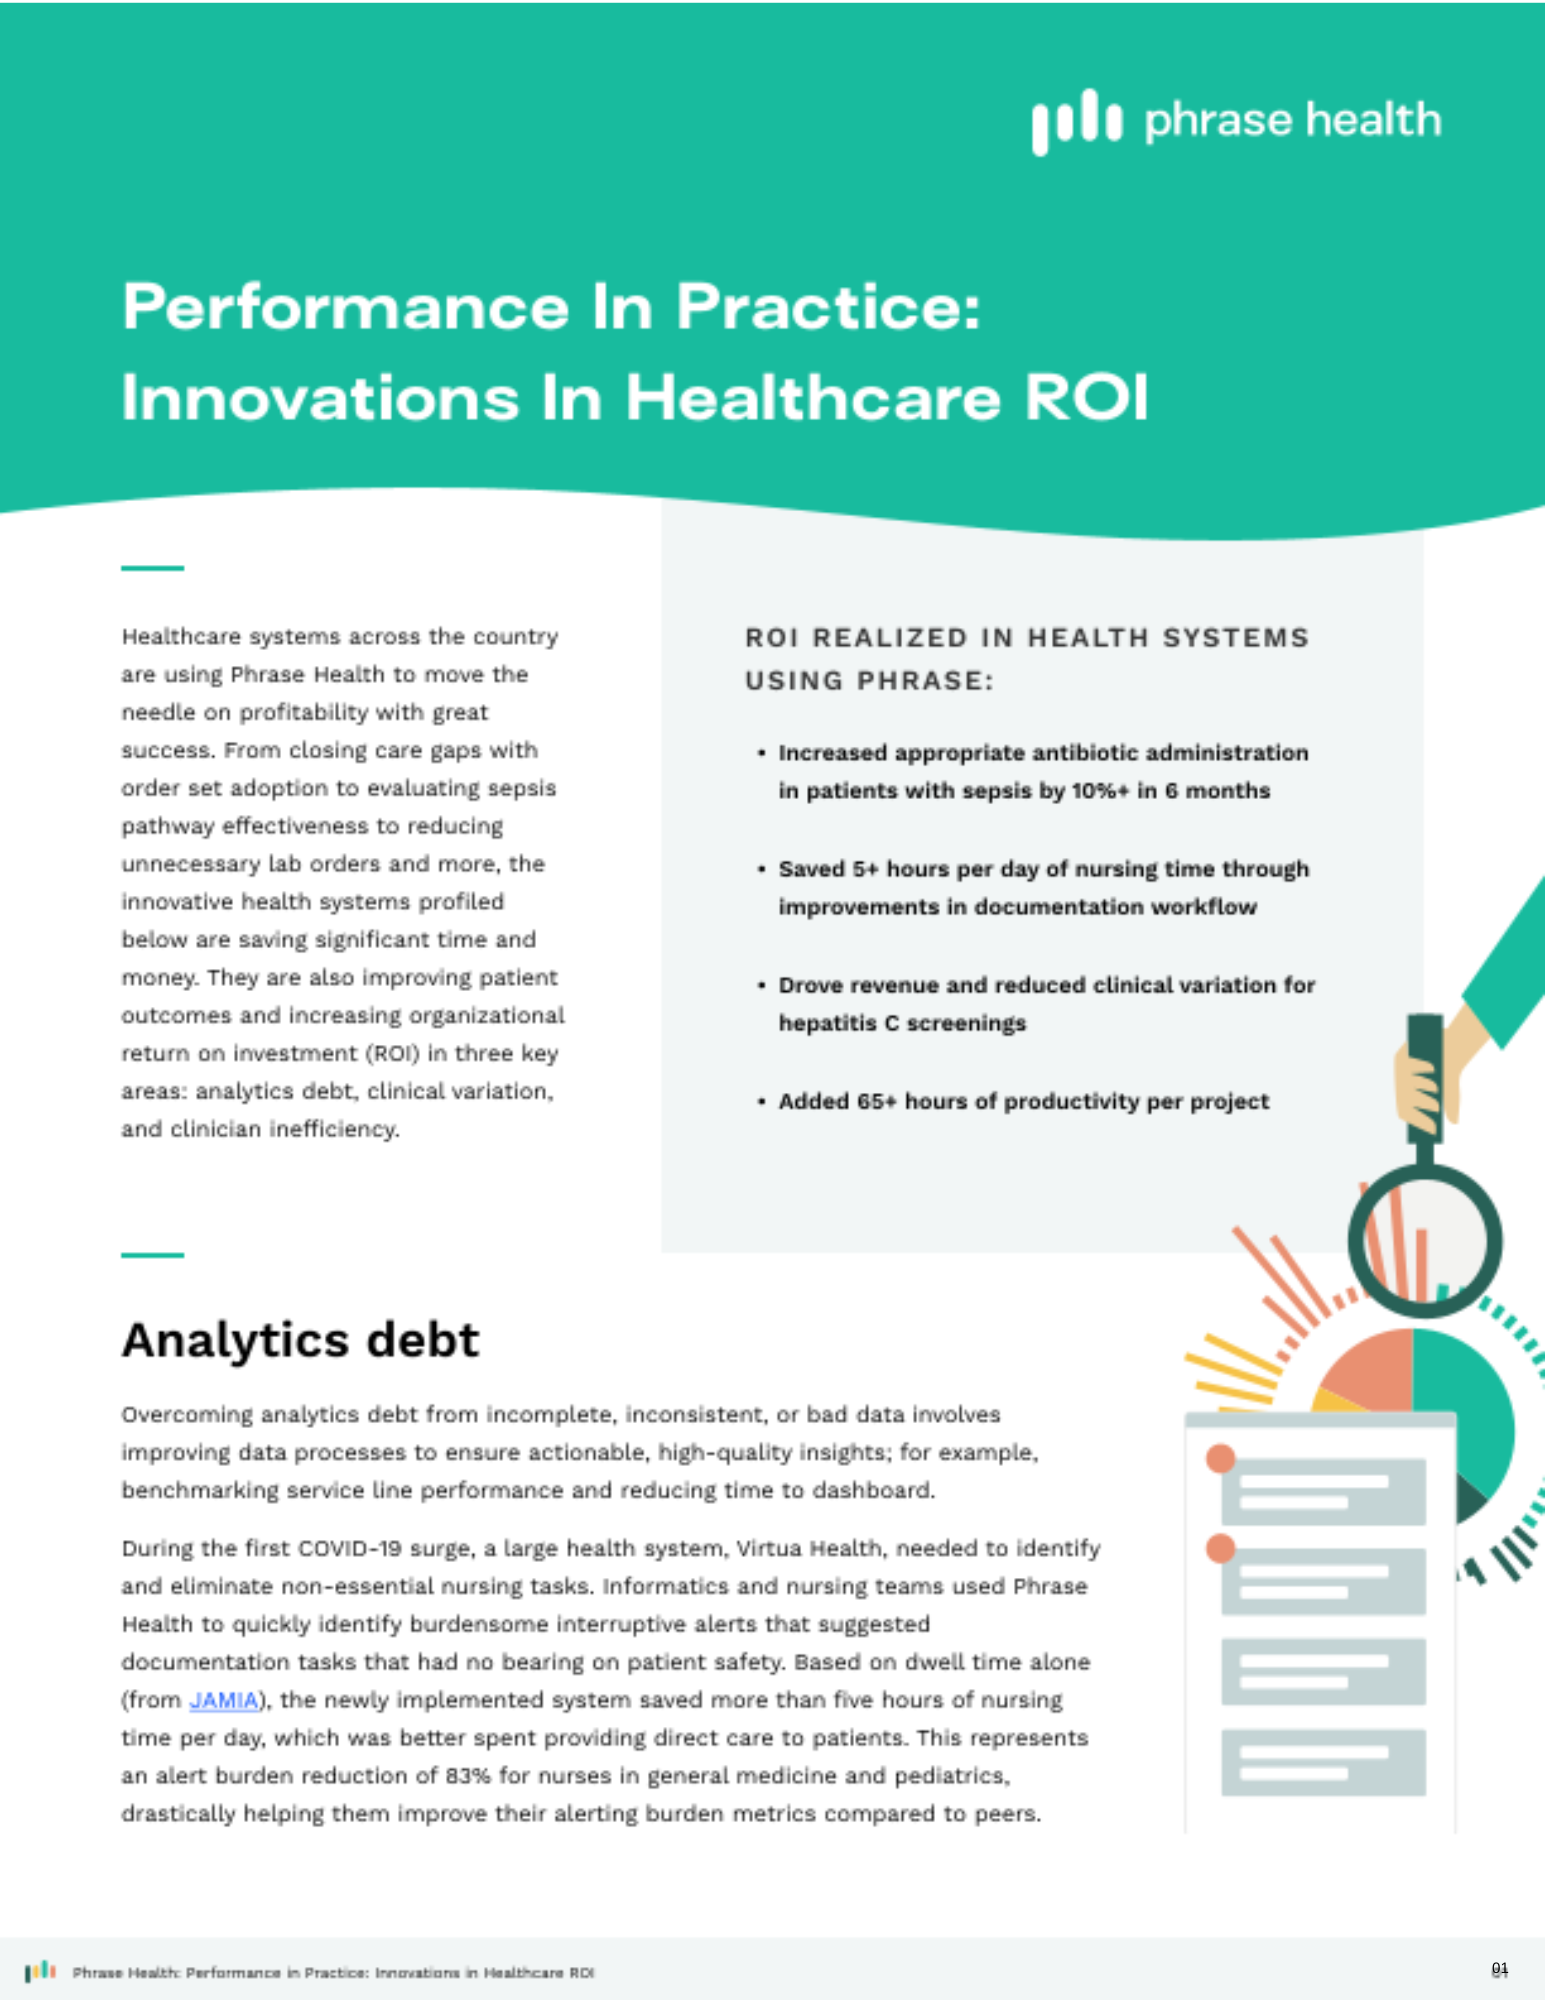 Innovations in Healthcare ROI - landing page